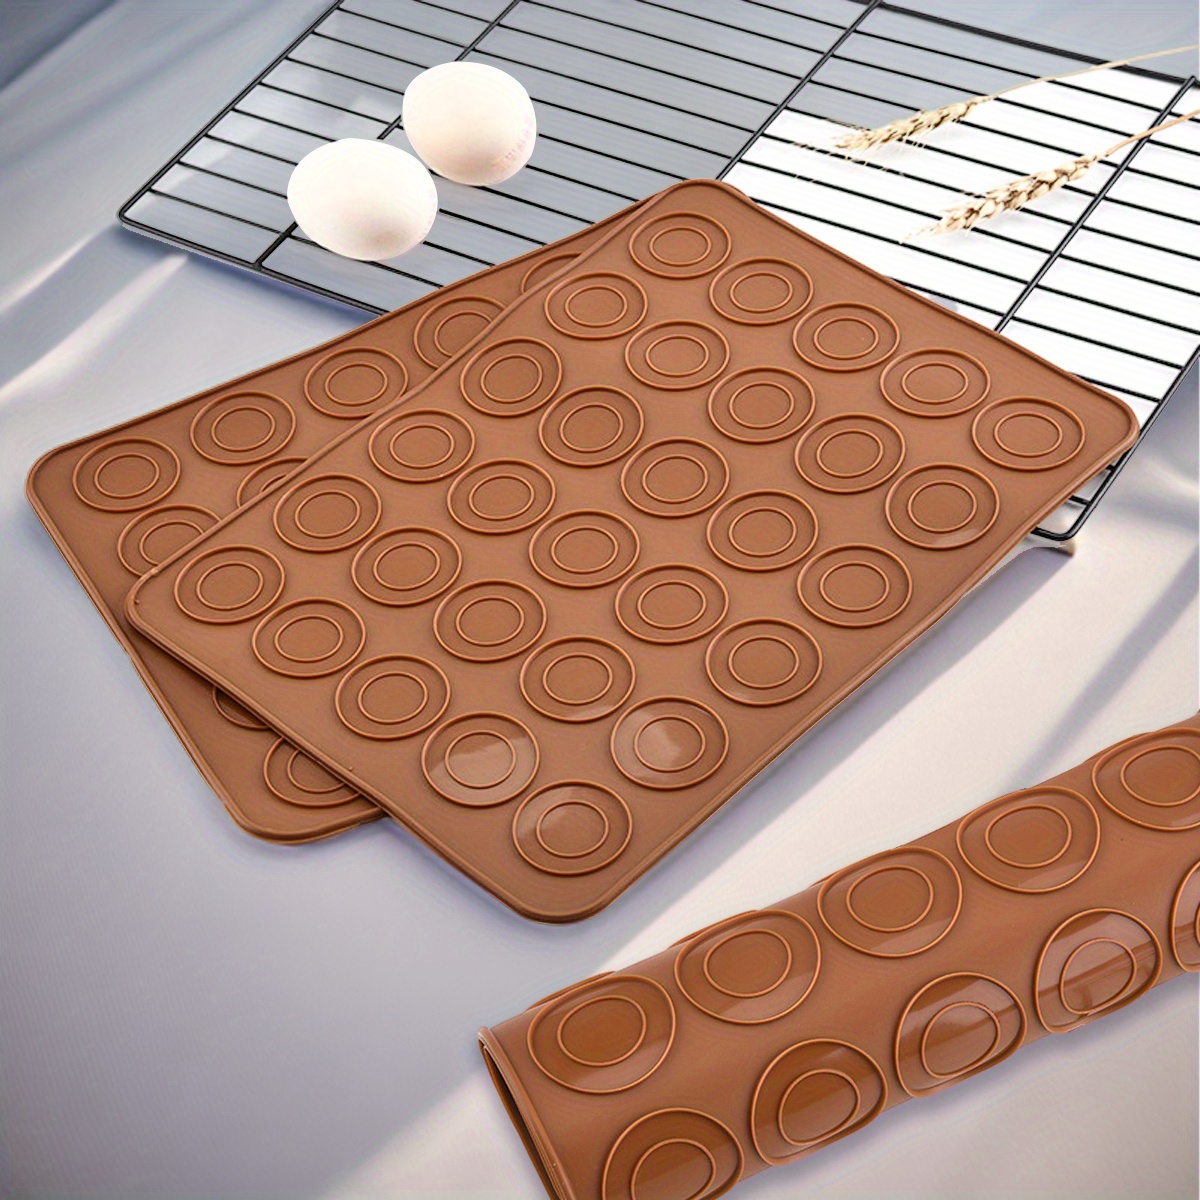 How to Clean a Silicone Baking Mat